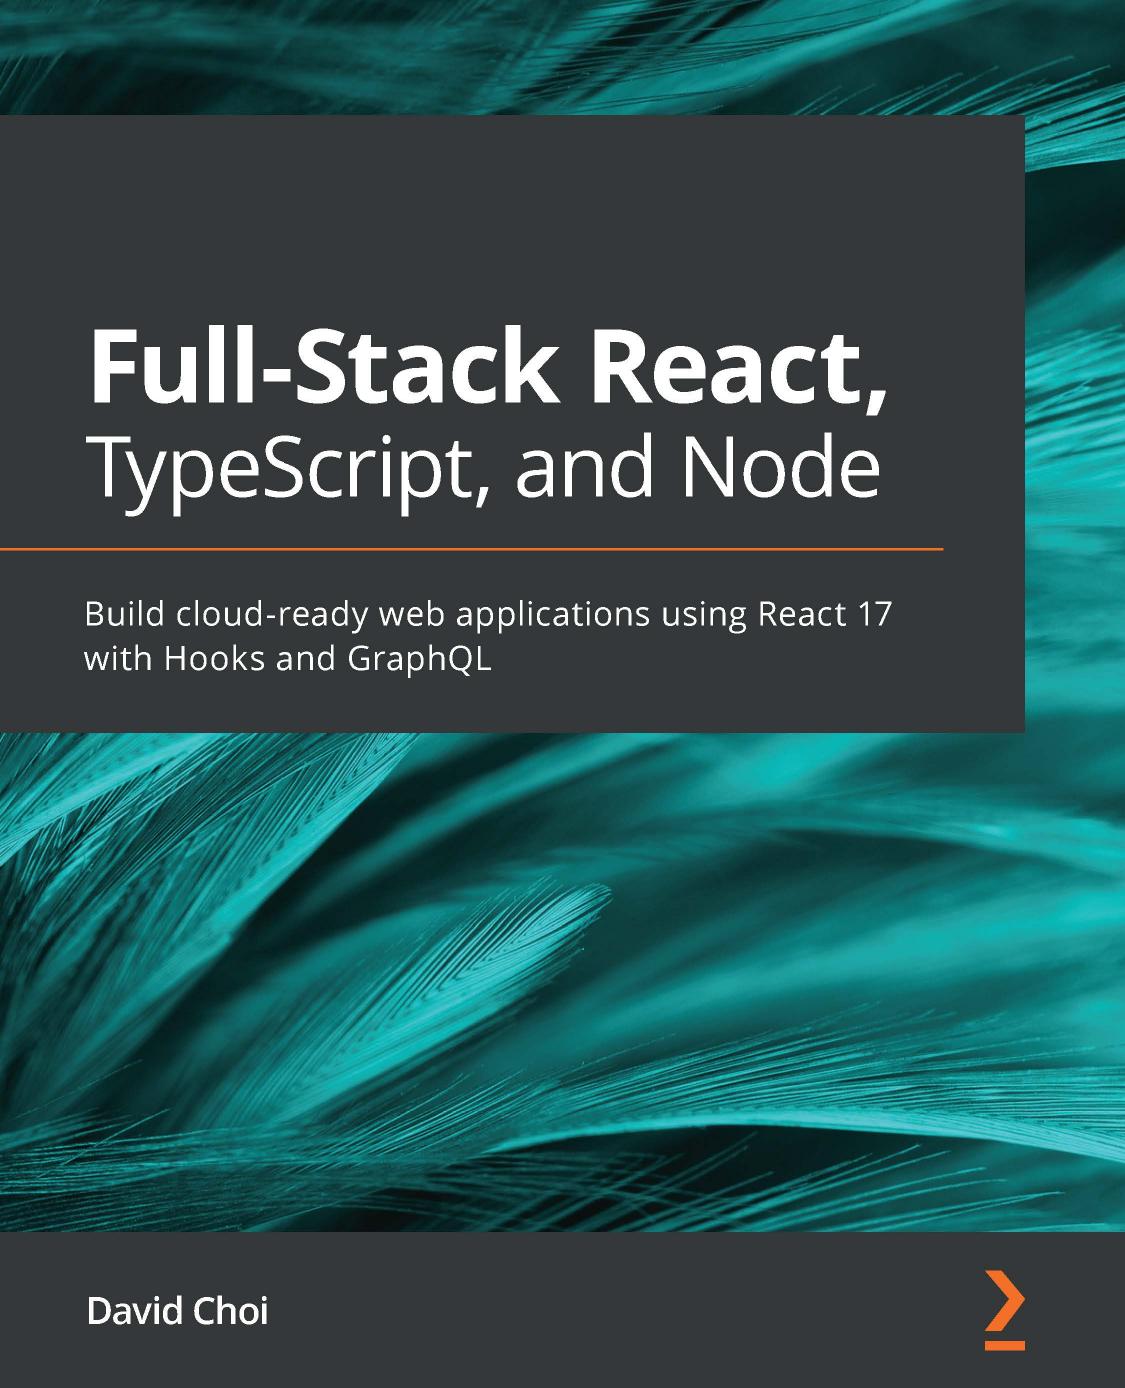 Full-Stack React, TypeScript, and Node: Build Cloud-Ready Web Applications using React 17 with Hooks and GraphQL